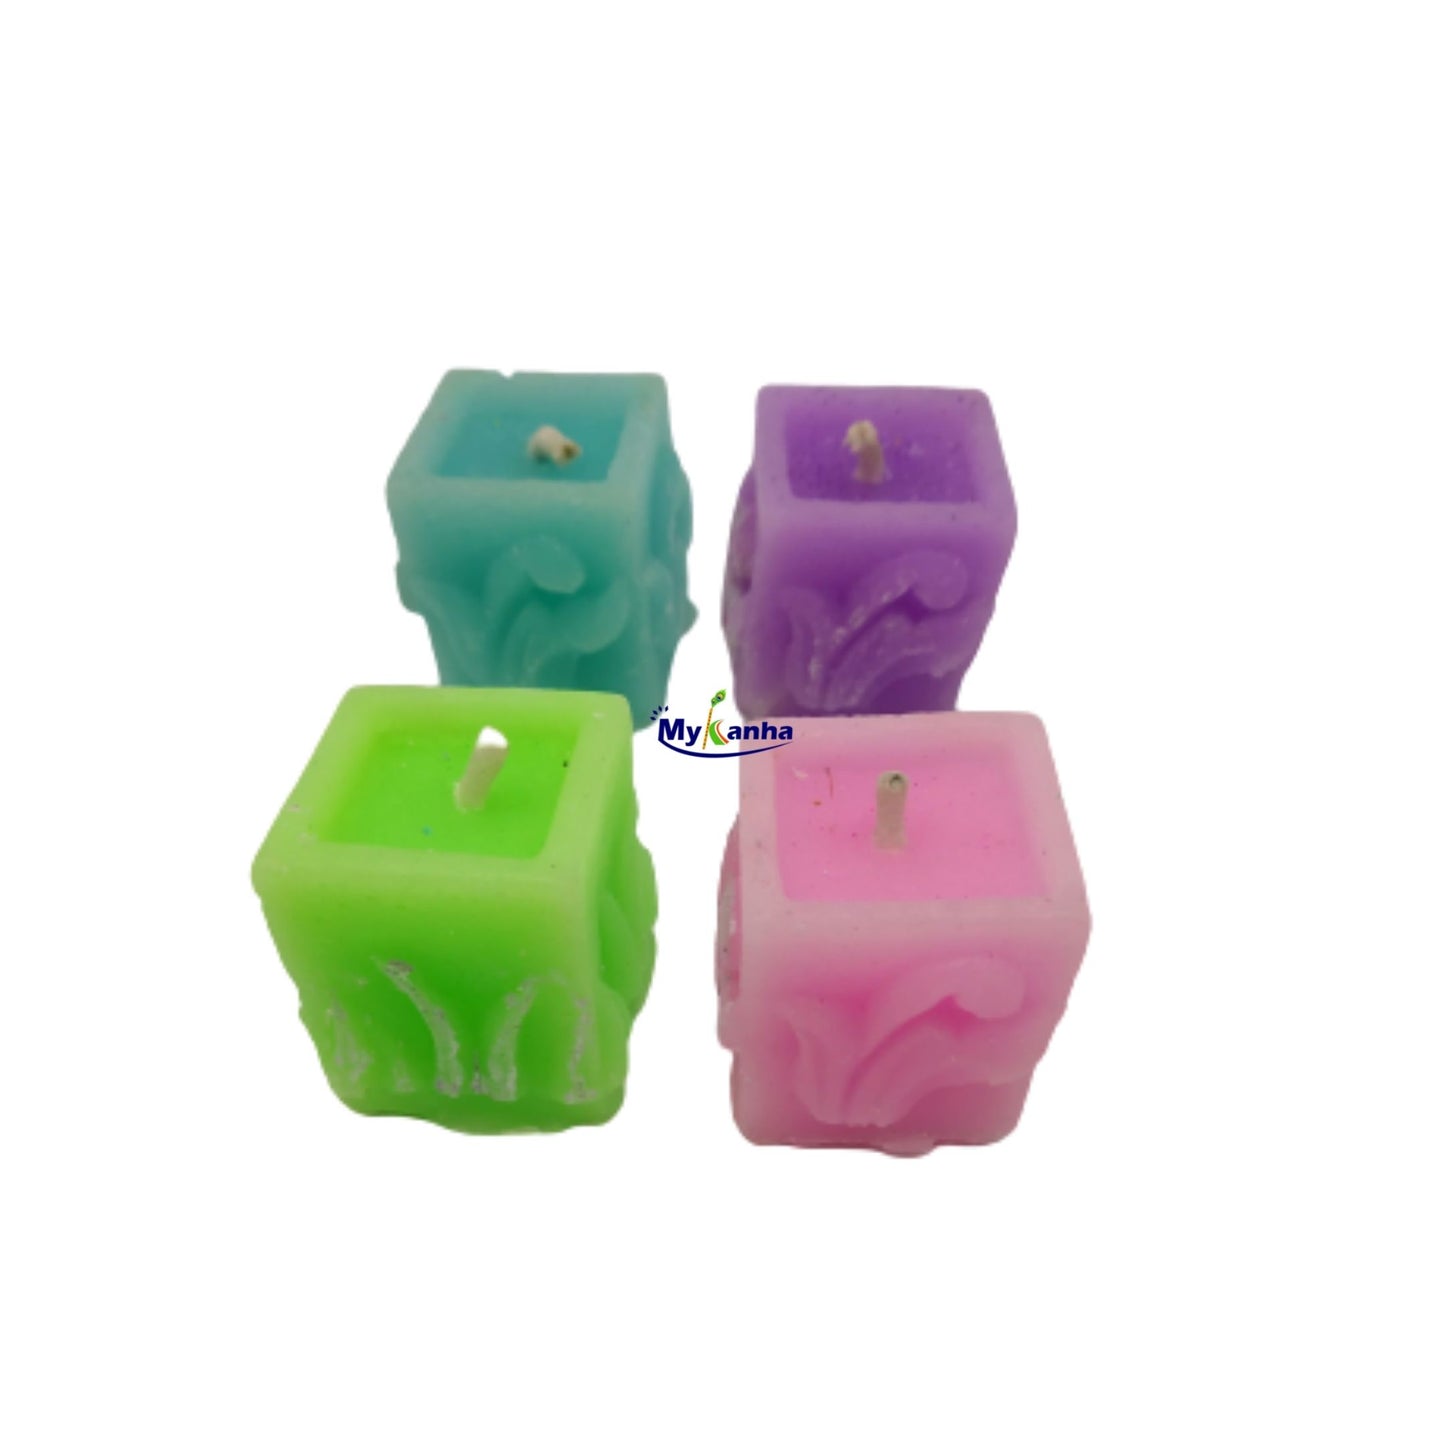 Tulsi Design Candle For Tulsi Plant (12 piece)